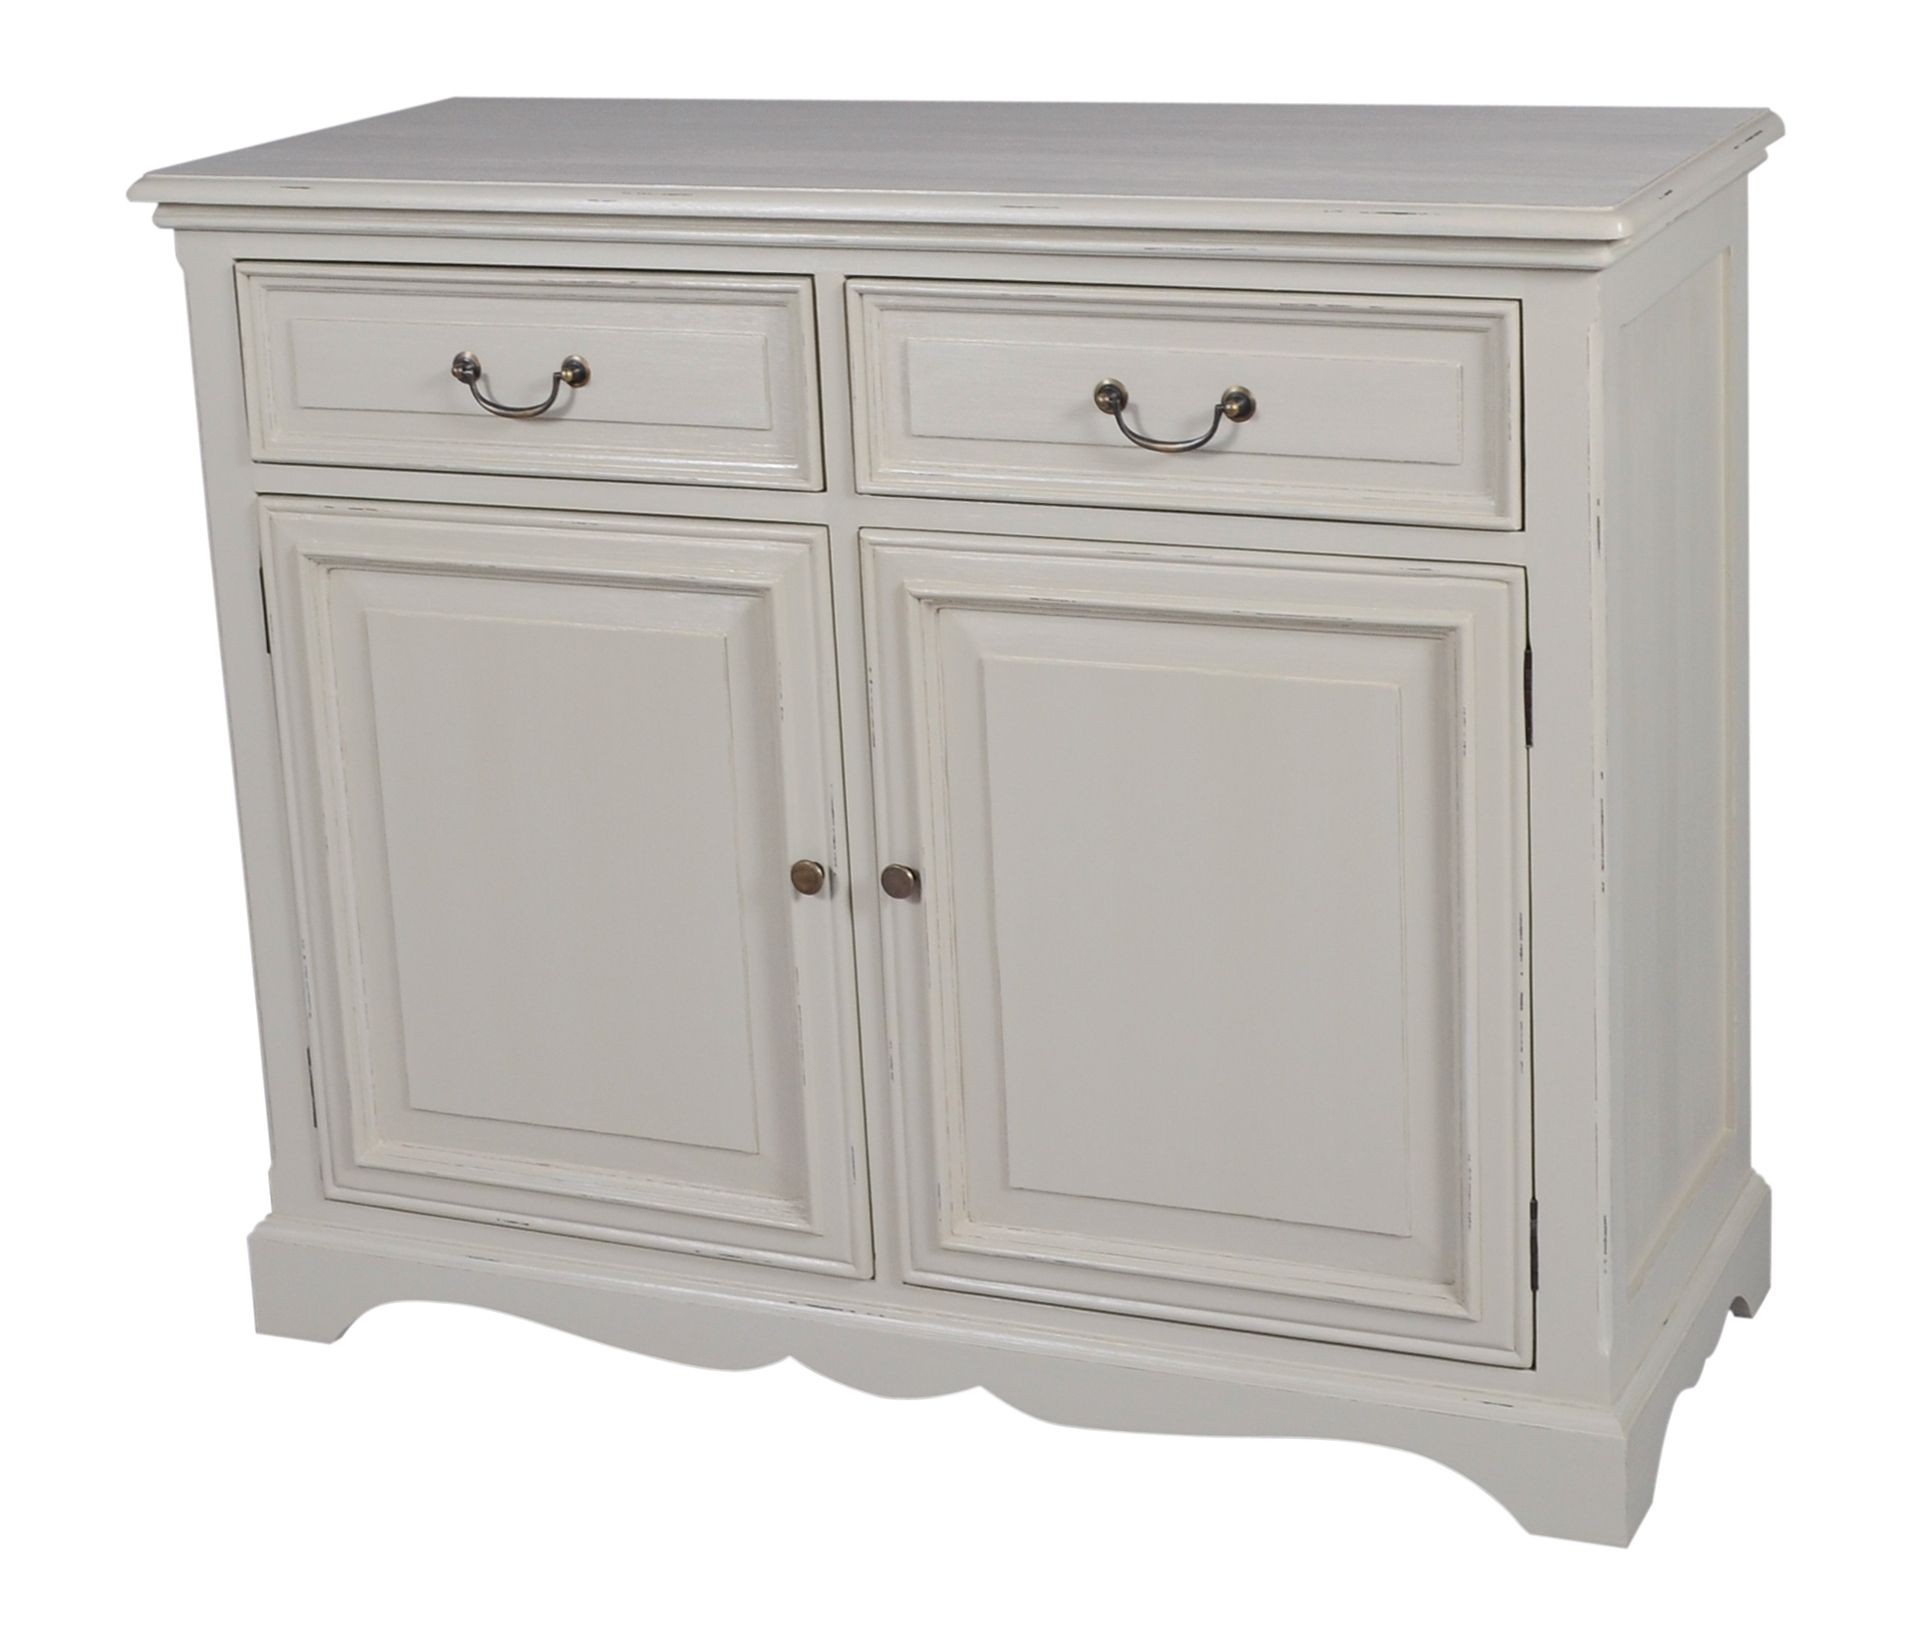 2 Door 2 Drawer Sideboard | Kelston House International With Newest 2 Drawer Sideboards (View 14 of 20)